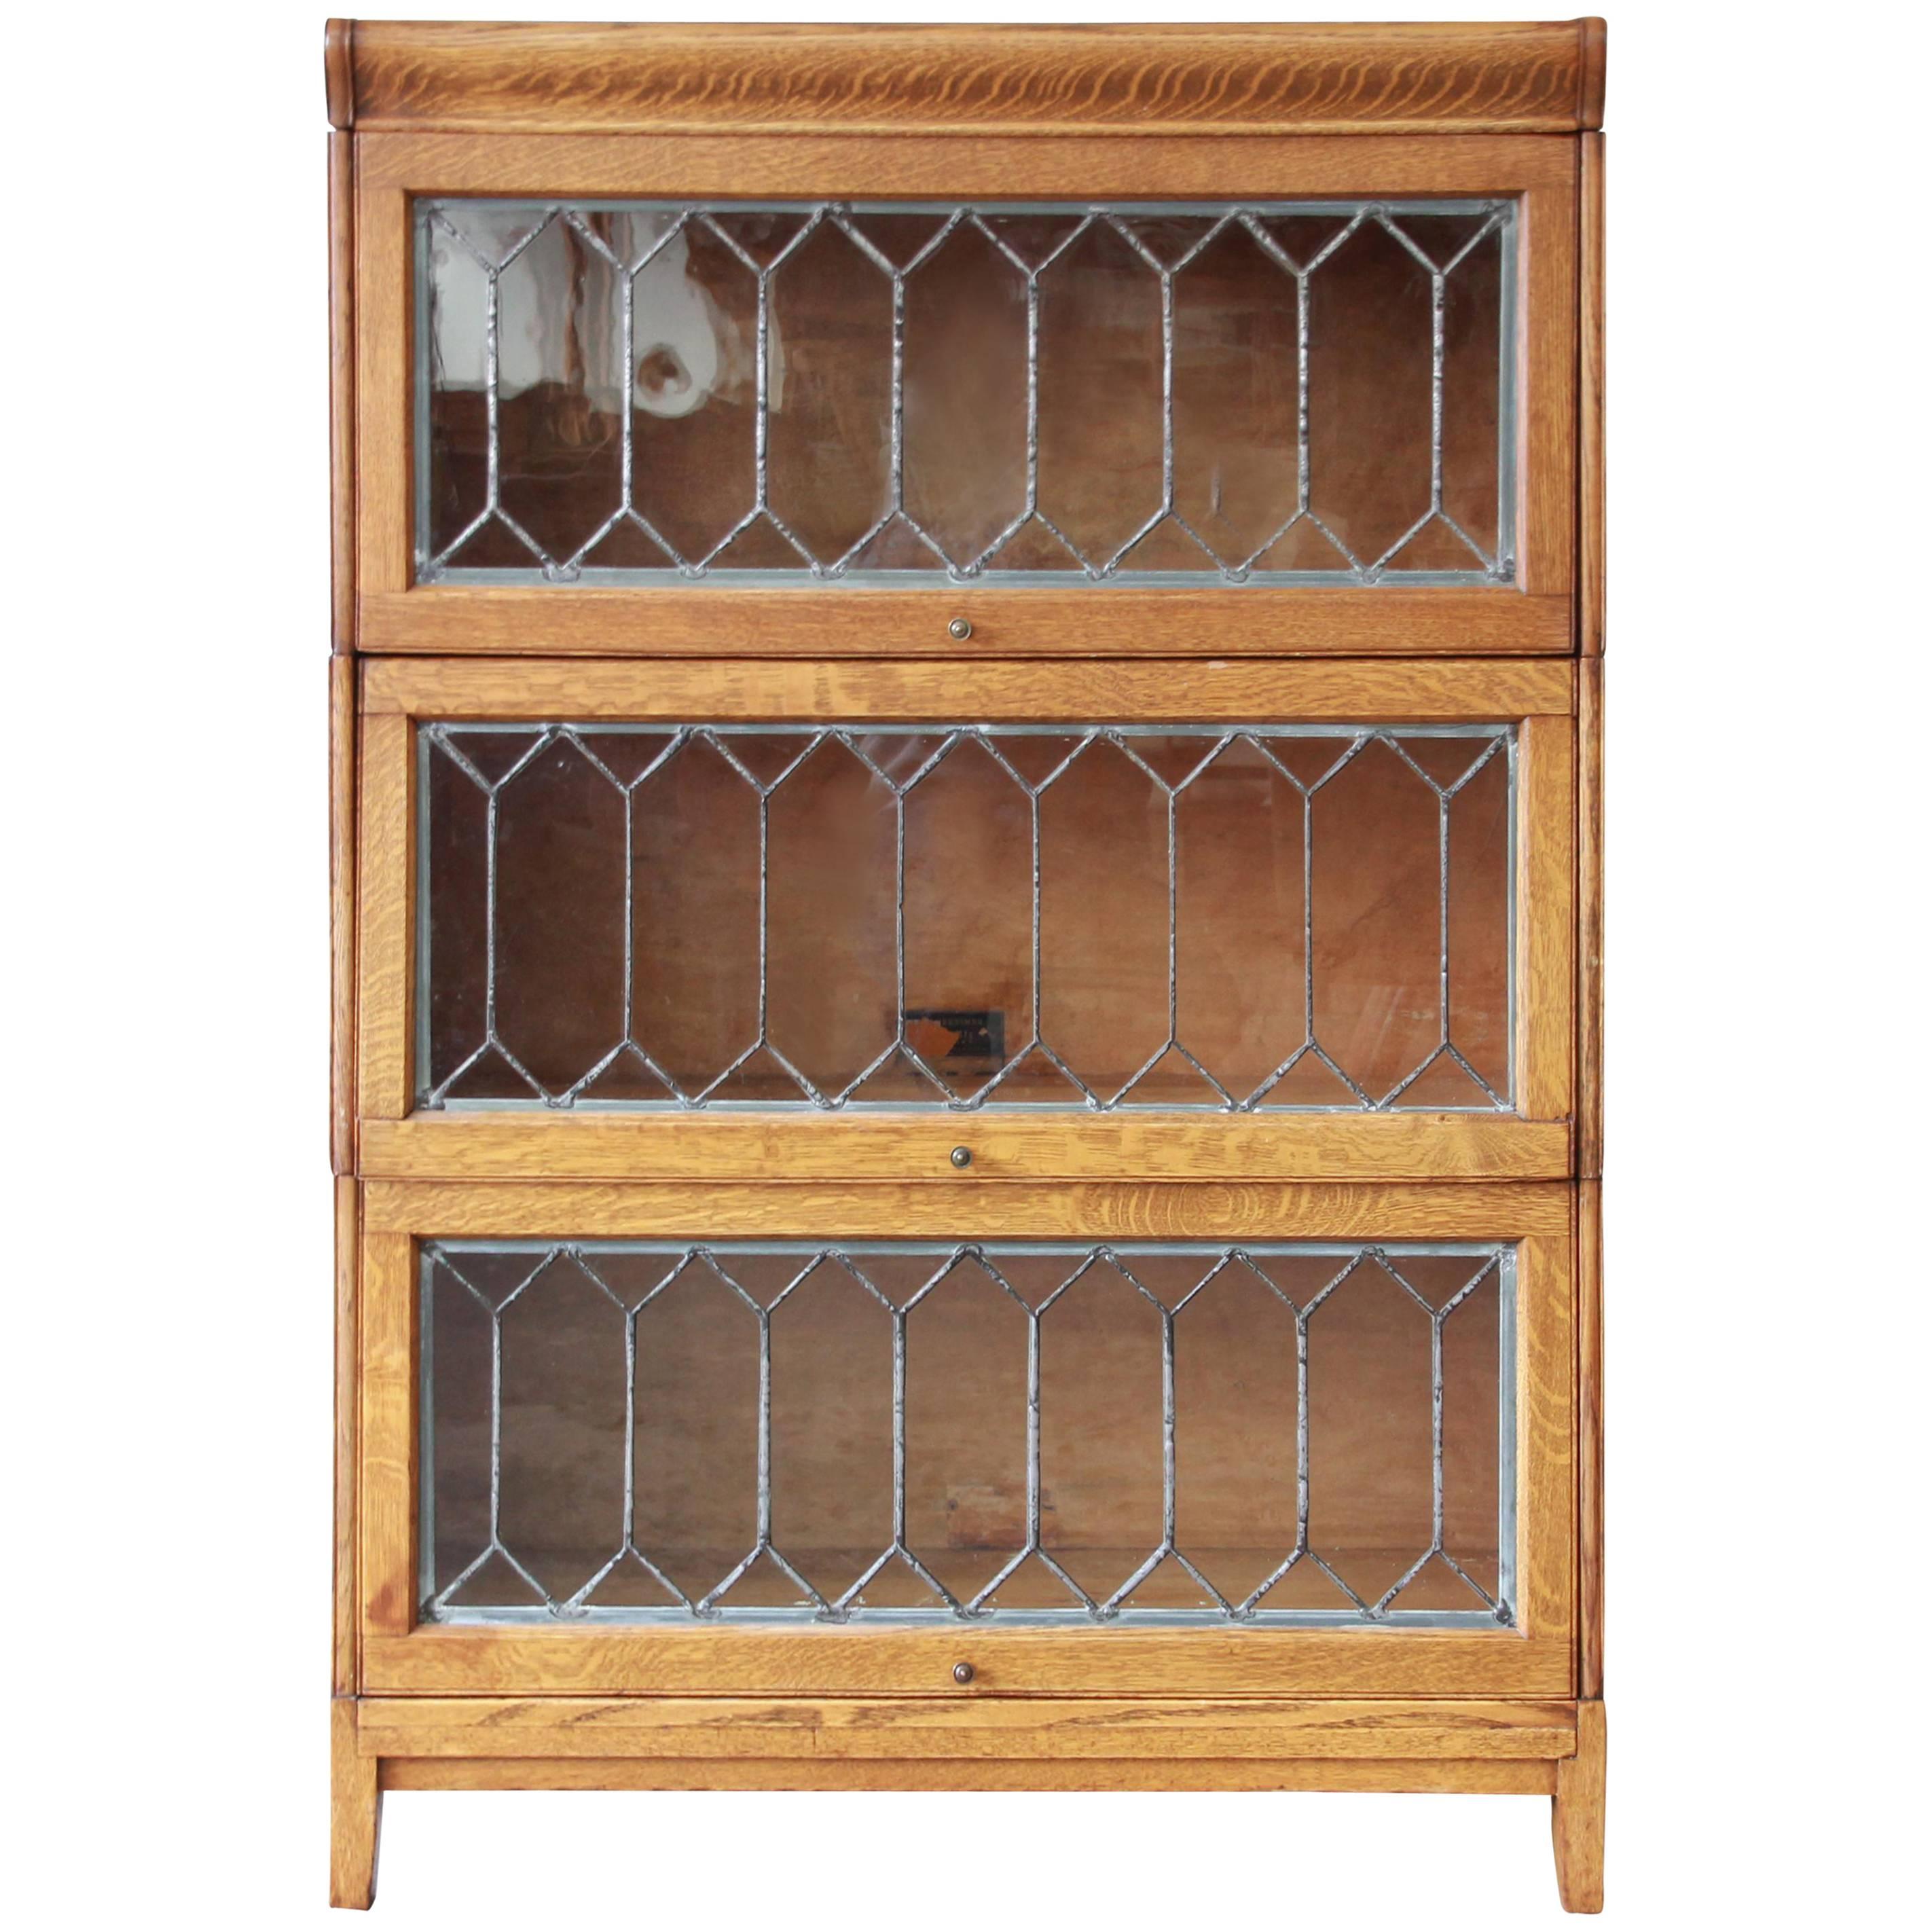 Antique Tiger Oak Three-Stack Barrister Bookcase with Leaded Glass Doors